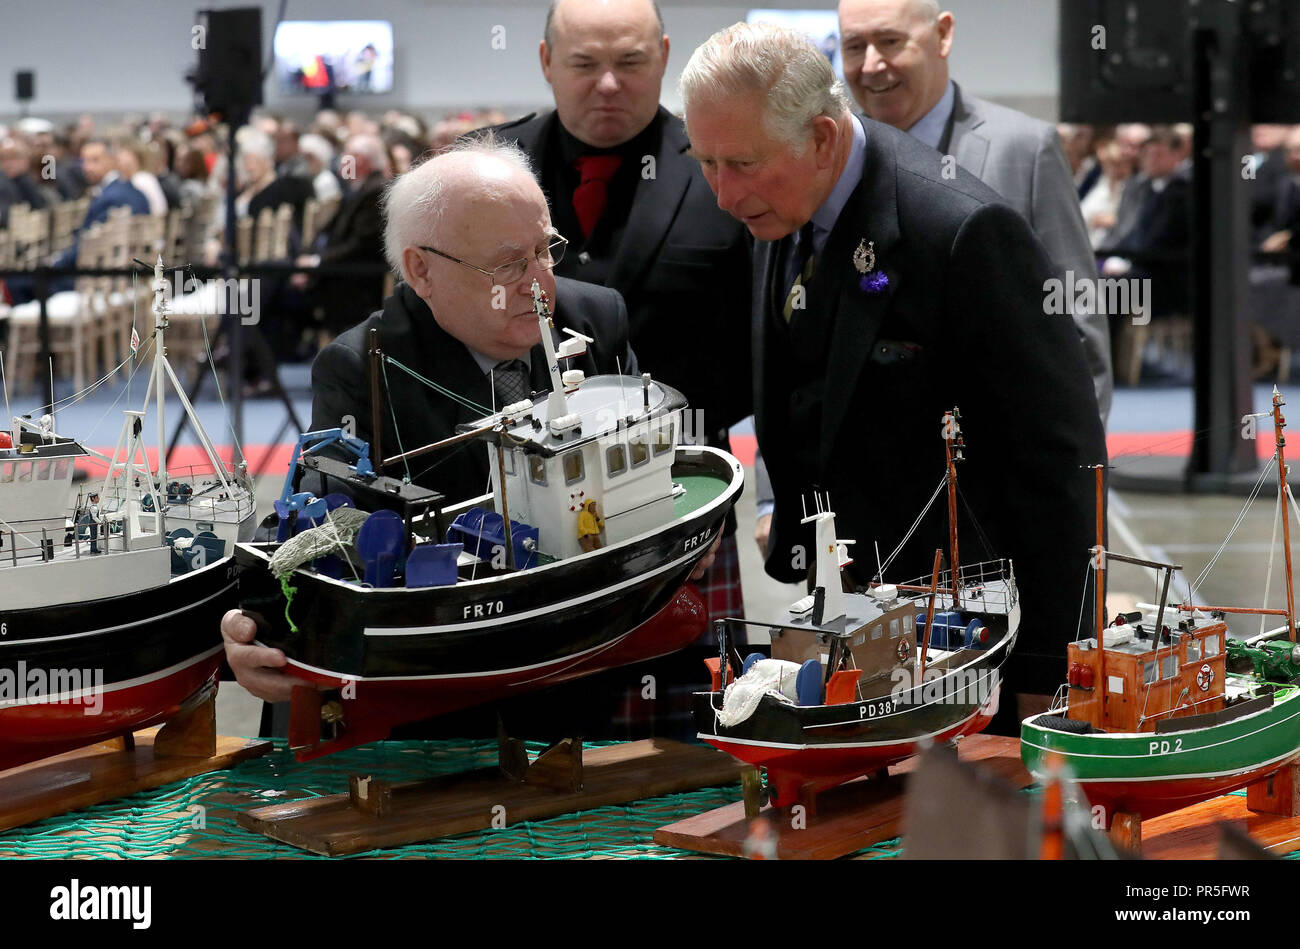 The Prince of Wales known as the Duke of Rothesay whilst in Scotland, is shown a model fishing boat by its maker John Coull during a visit to Peterhead fish market for the opening of the new North Bay market building. Stock Photo